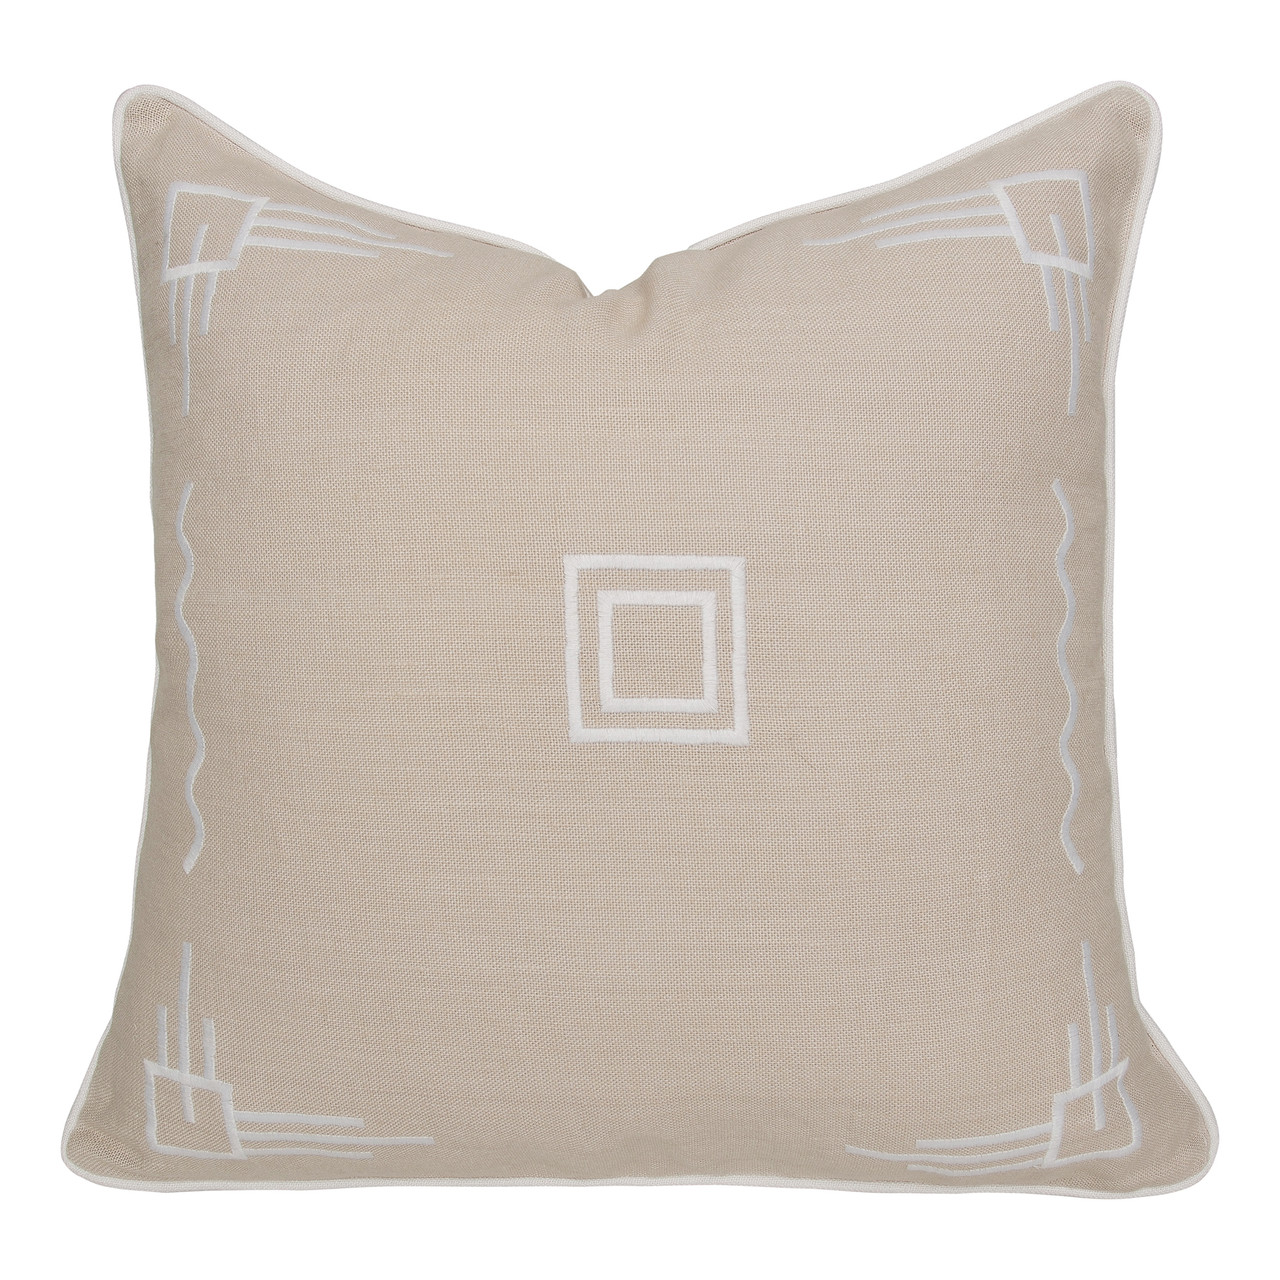 ** CLEARANCE** Our Supplier is Closing - Coco Chanel Embroidered Cushion